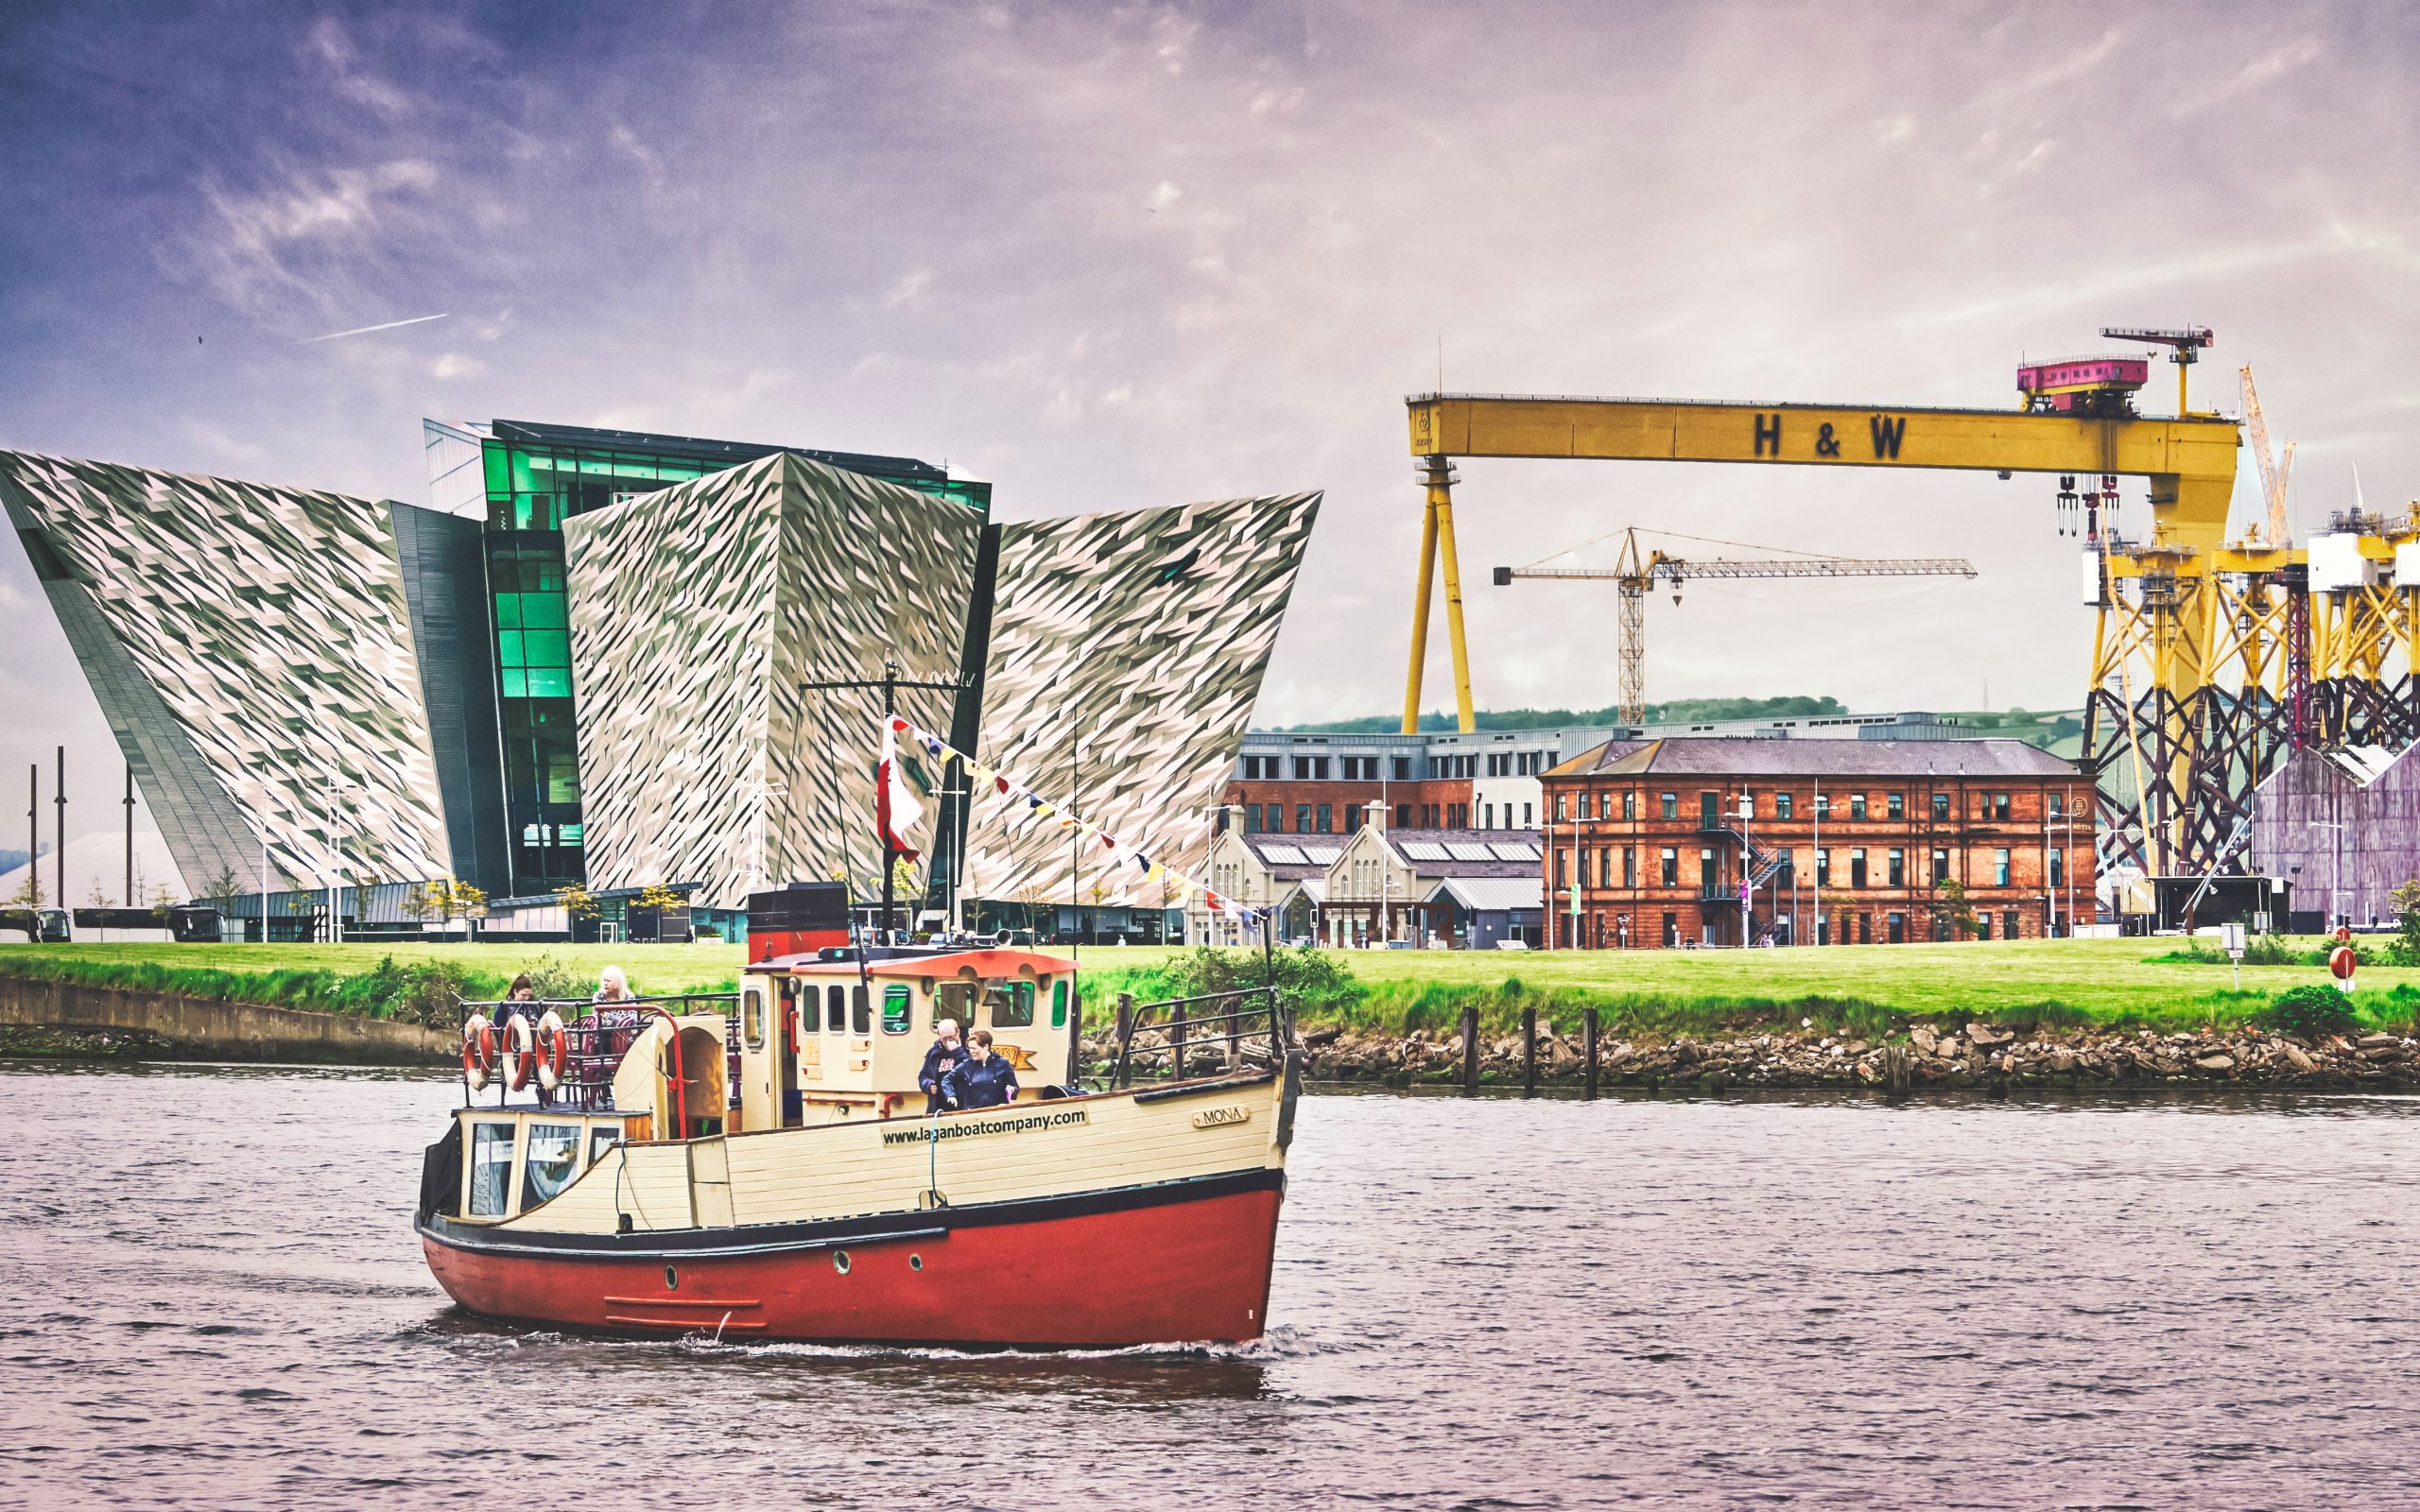 Three Belfast landmarks in one shot. From left to right: Titanic Belfast, a museum for all things Titanic related; the very large Harland and Wolffe ship building crane Goliath; and immediately below it, the red bricked building where the Titanic was designed by Harland and Wolff prior to its fateful end in 1912 (May, 2019).